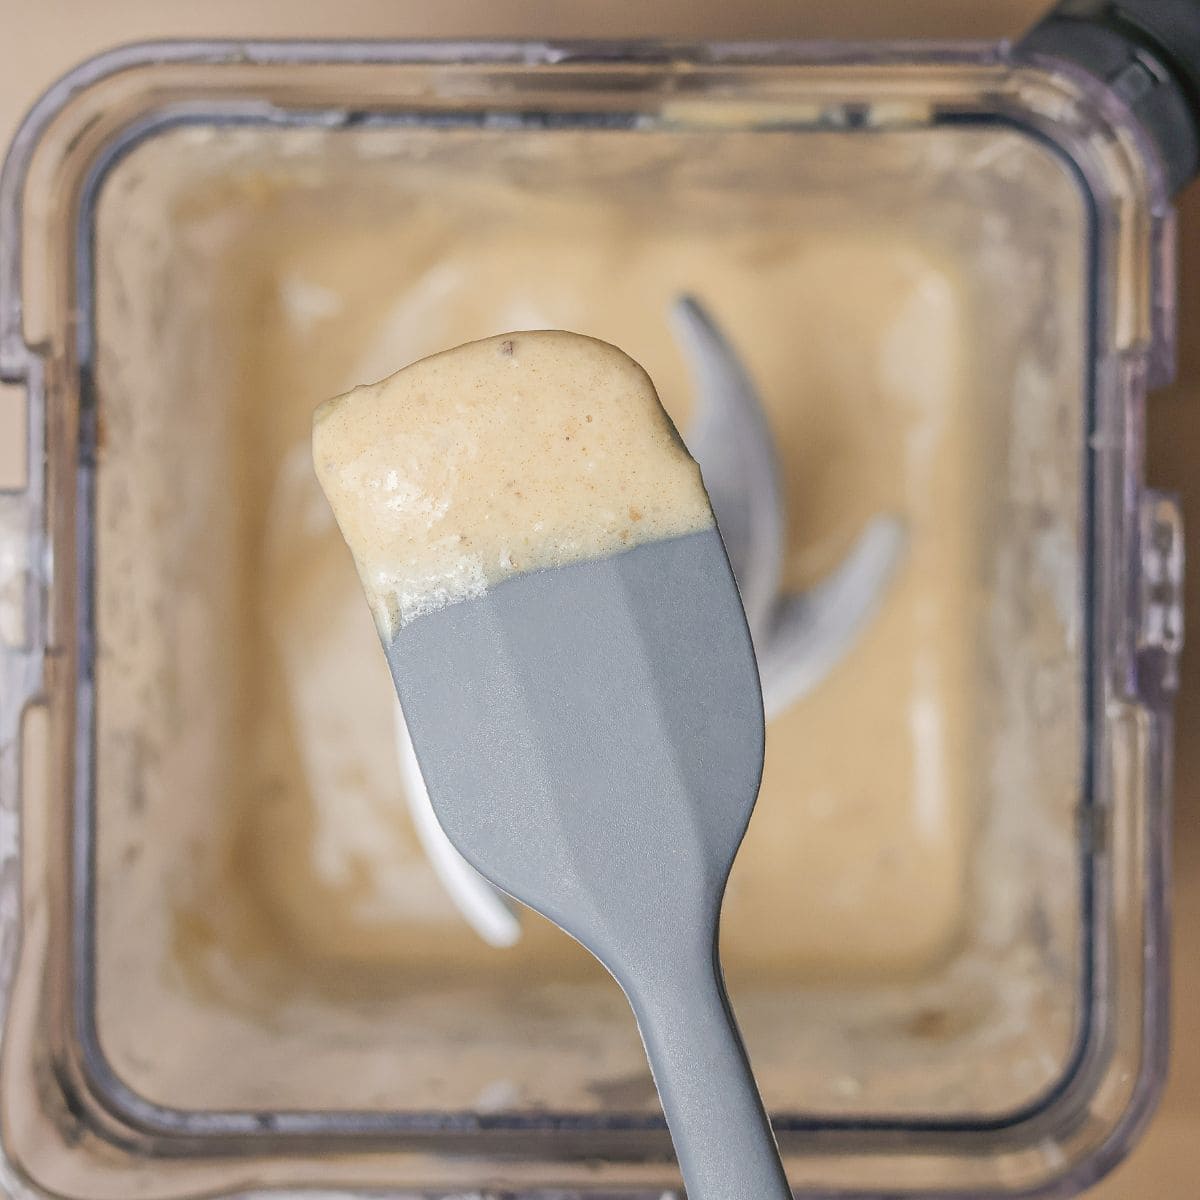 Top view of a spoon scooping up a sample from a freshly blended Hulk smoothie to test the flavor and texture.